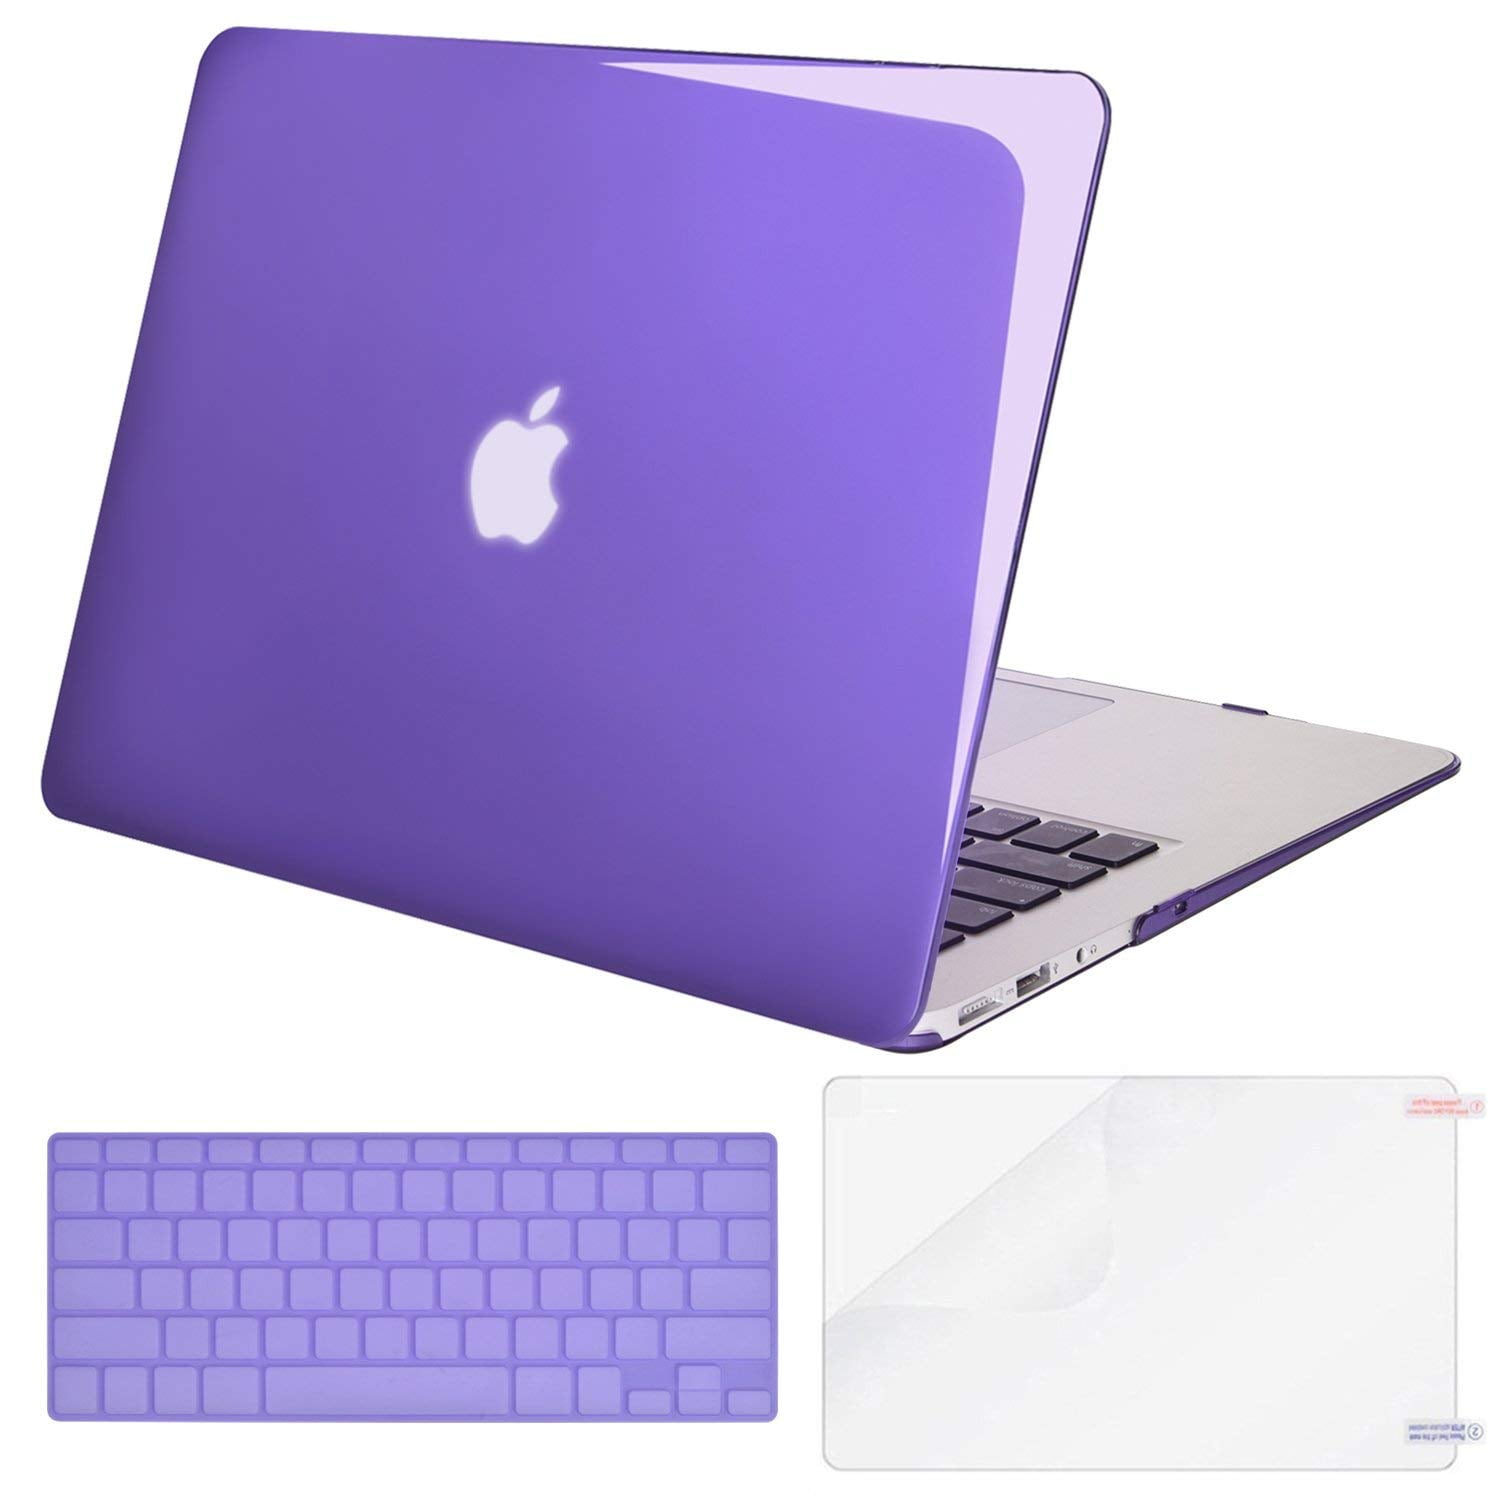 Sumplee MacBook Air 13 Inch Case A1369/A1466 Release 2010-2017 Version Thin Plastic Anti-Scratch Hard Shell Protective Case with Keyboard Cover Compatible for MacBook Air 13 Inch Color Brick 